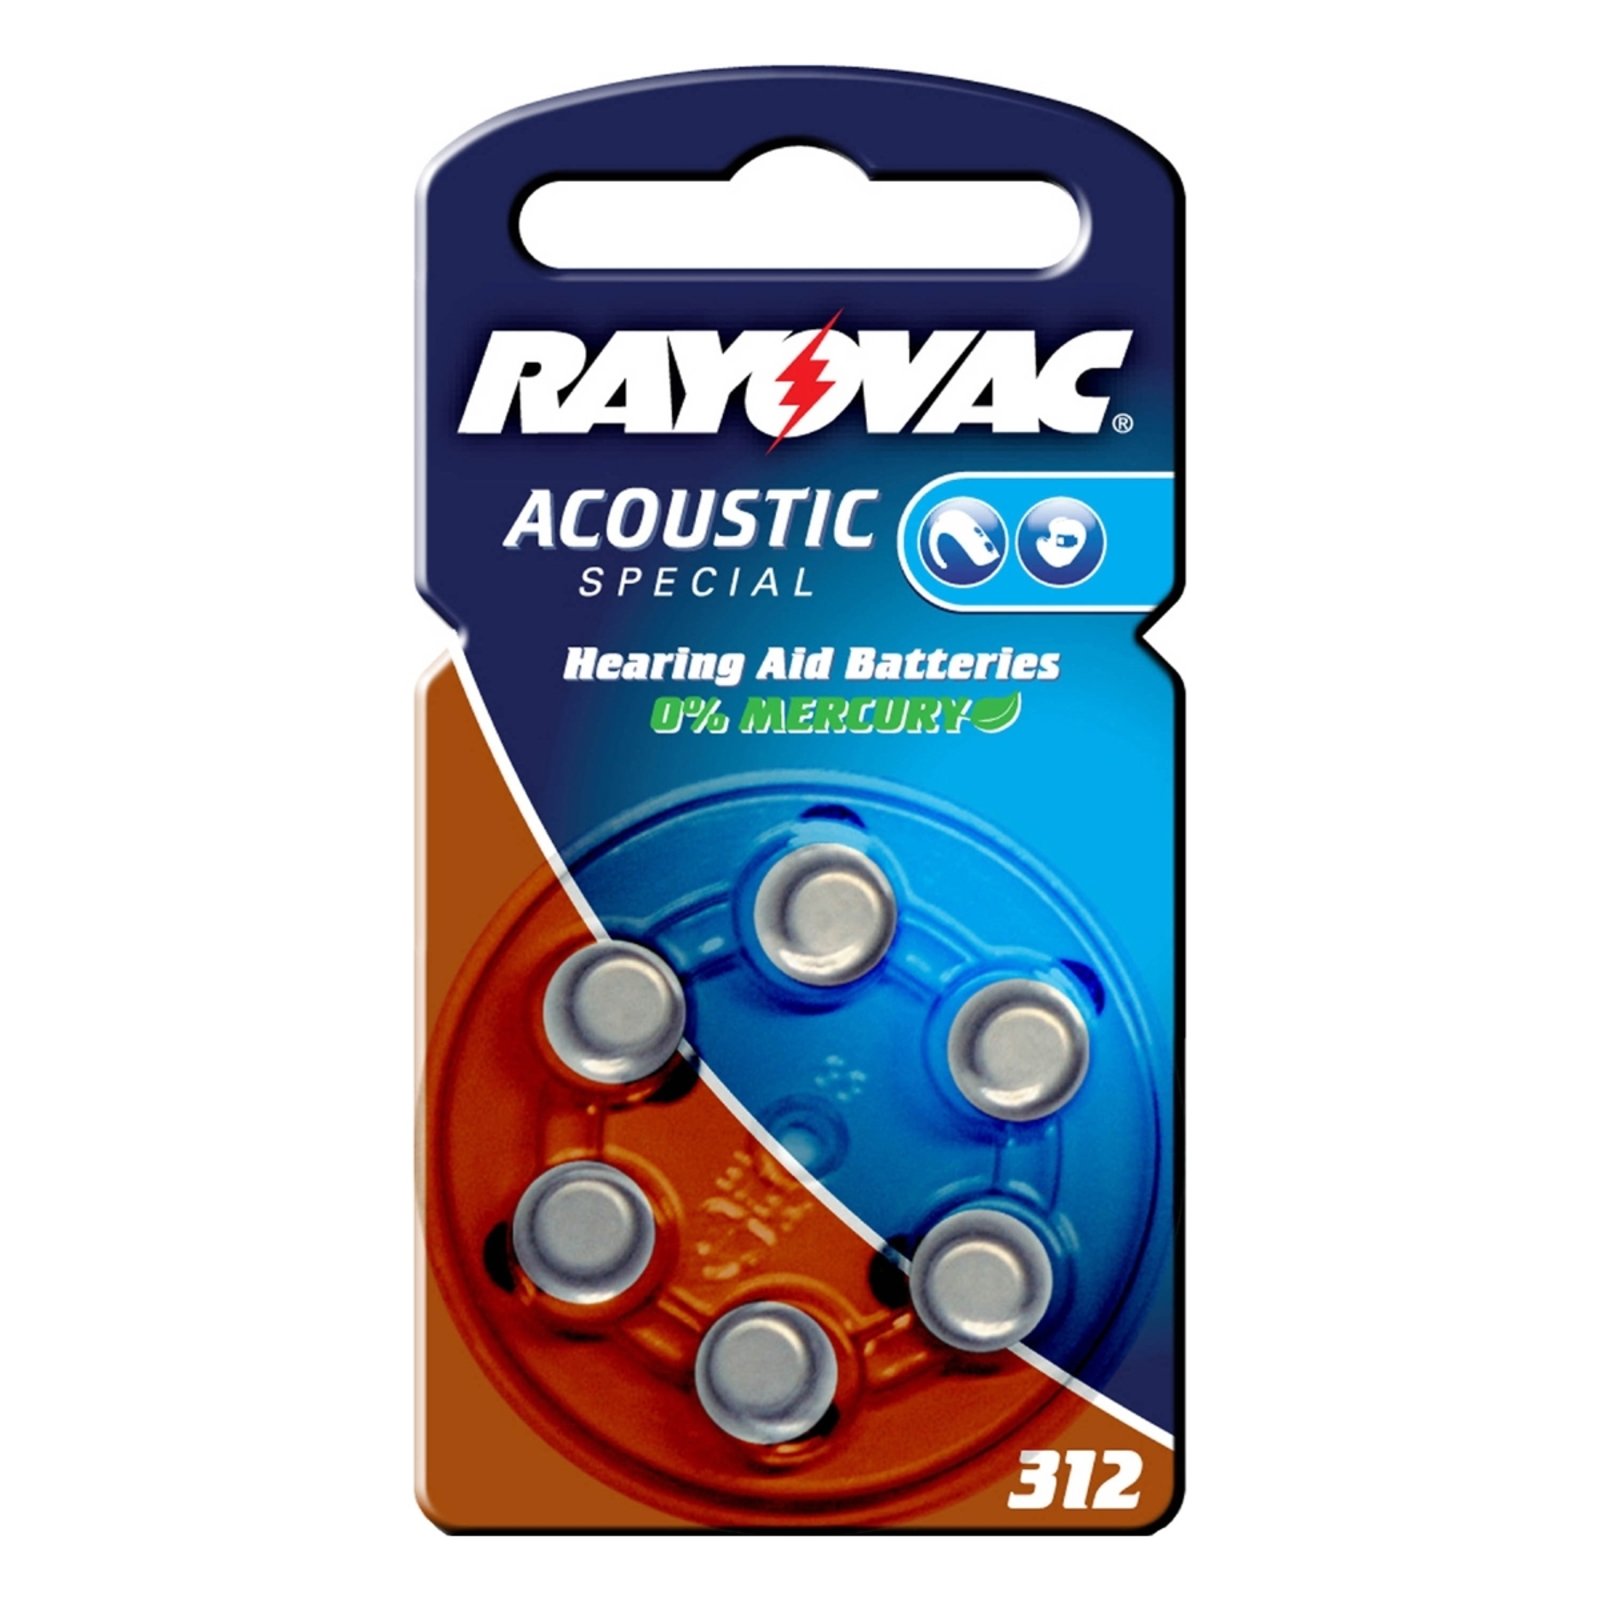 Rayovac 312 Acoustic 1.4 V, 180mAh button cell